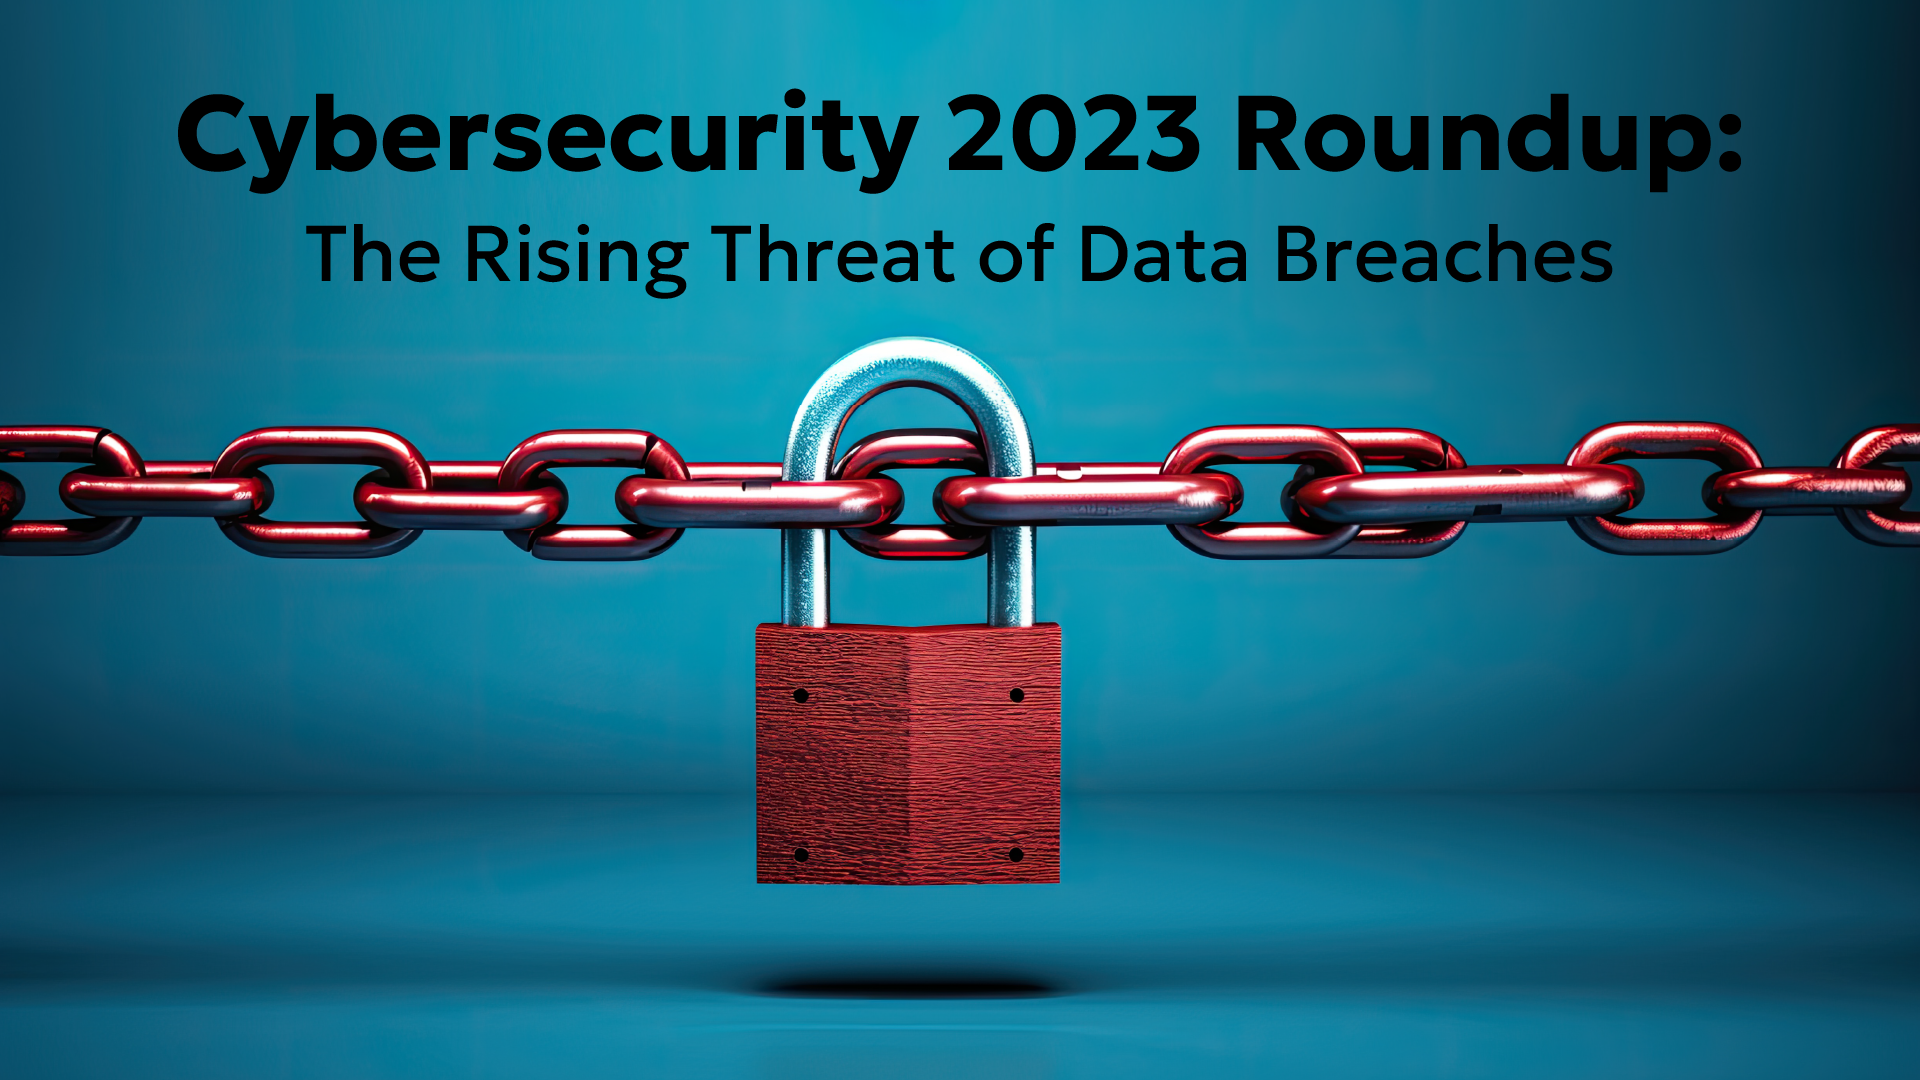 Cybersecurity 2023 Roundup: The Rising Threat of Data Breaches